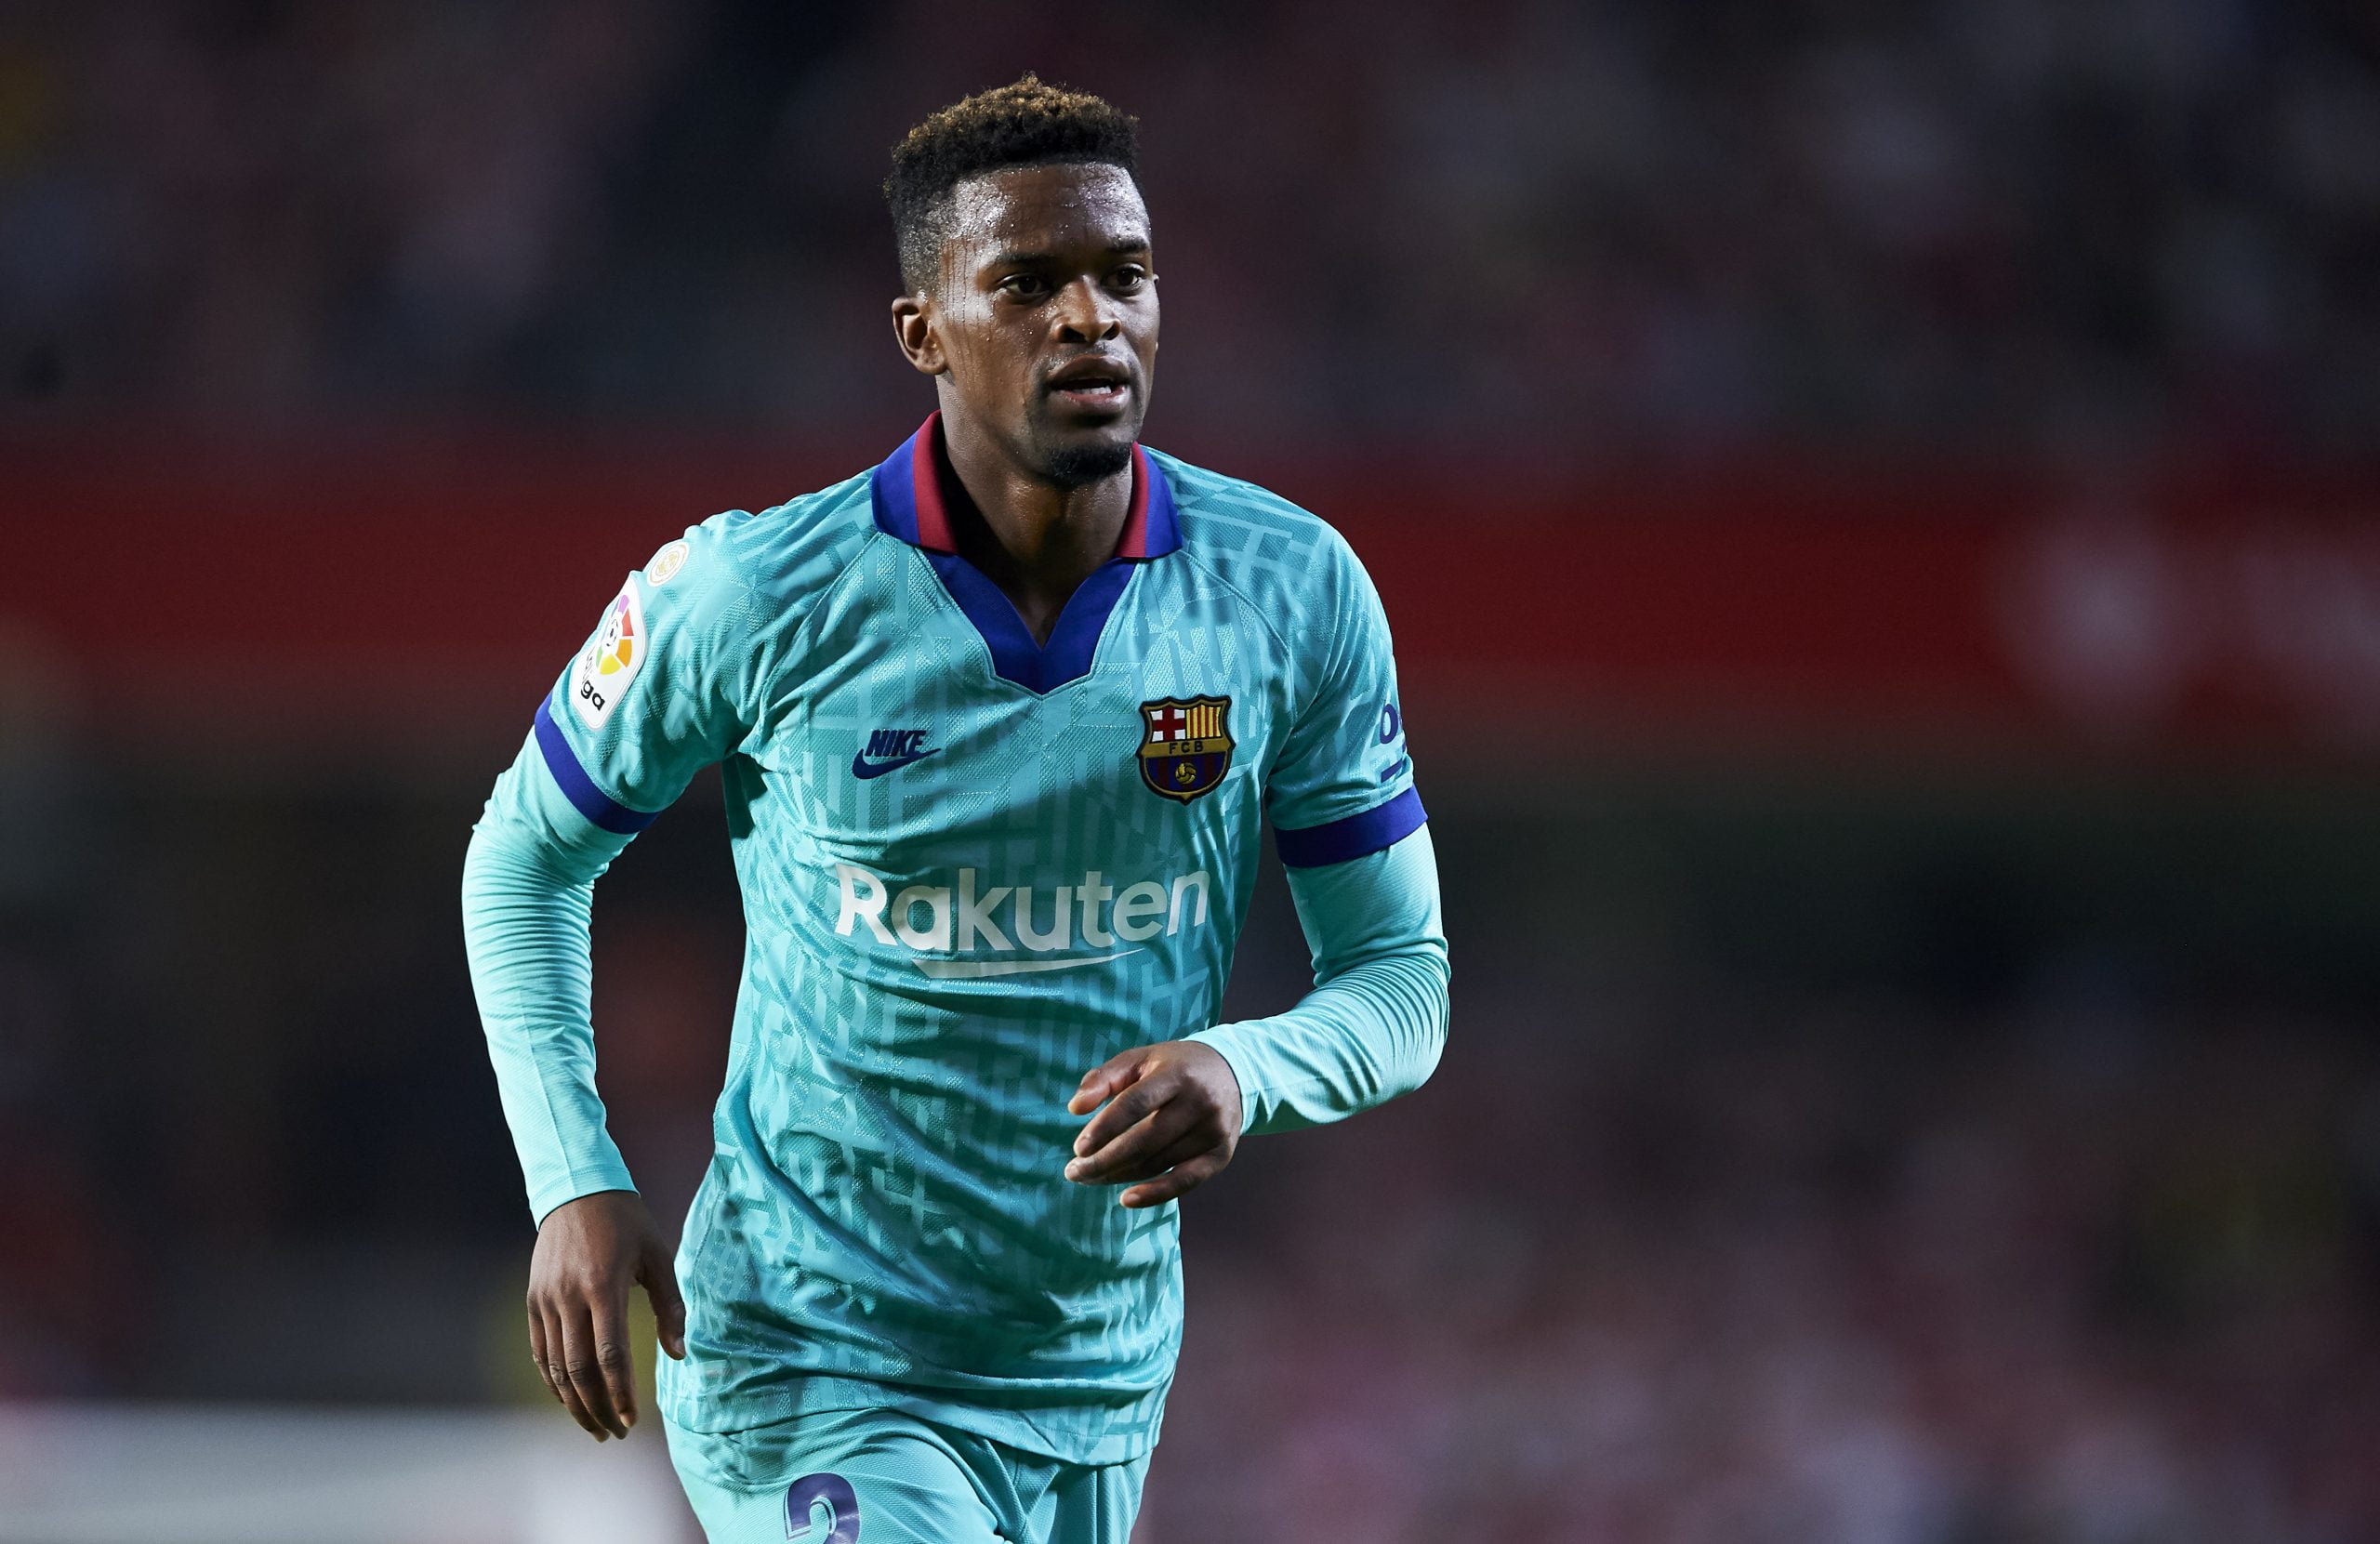 Nelson Semedo of FC Barcelona reacts during the Liga match between Granada CF and FC Barcelona at Estadio Nuevo Los Carmenes on September 21, 2019 in Granada, Spain. (Photo by Aitor Alcalde/Getty Images)